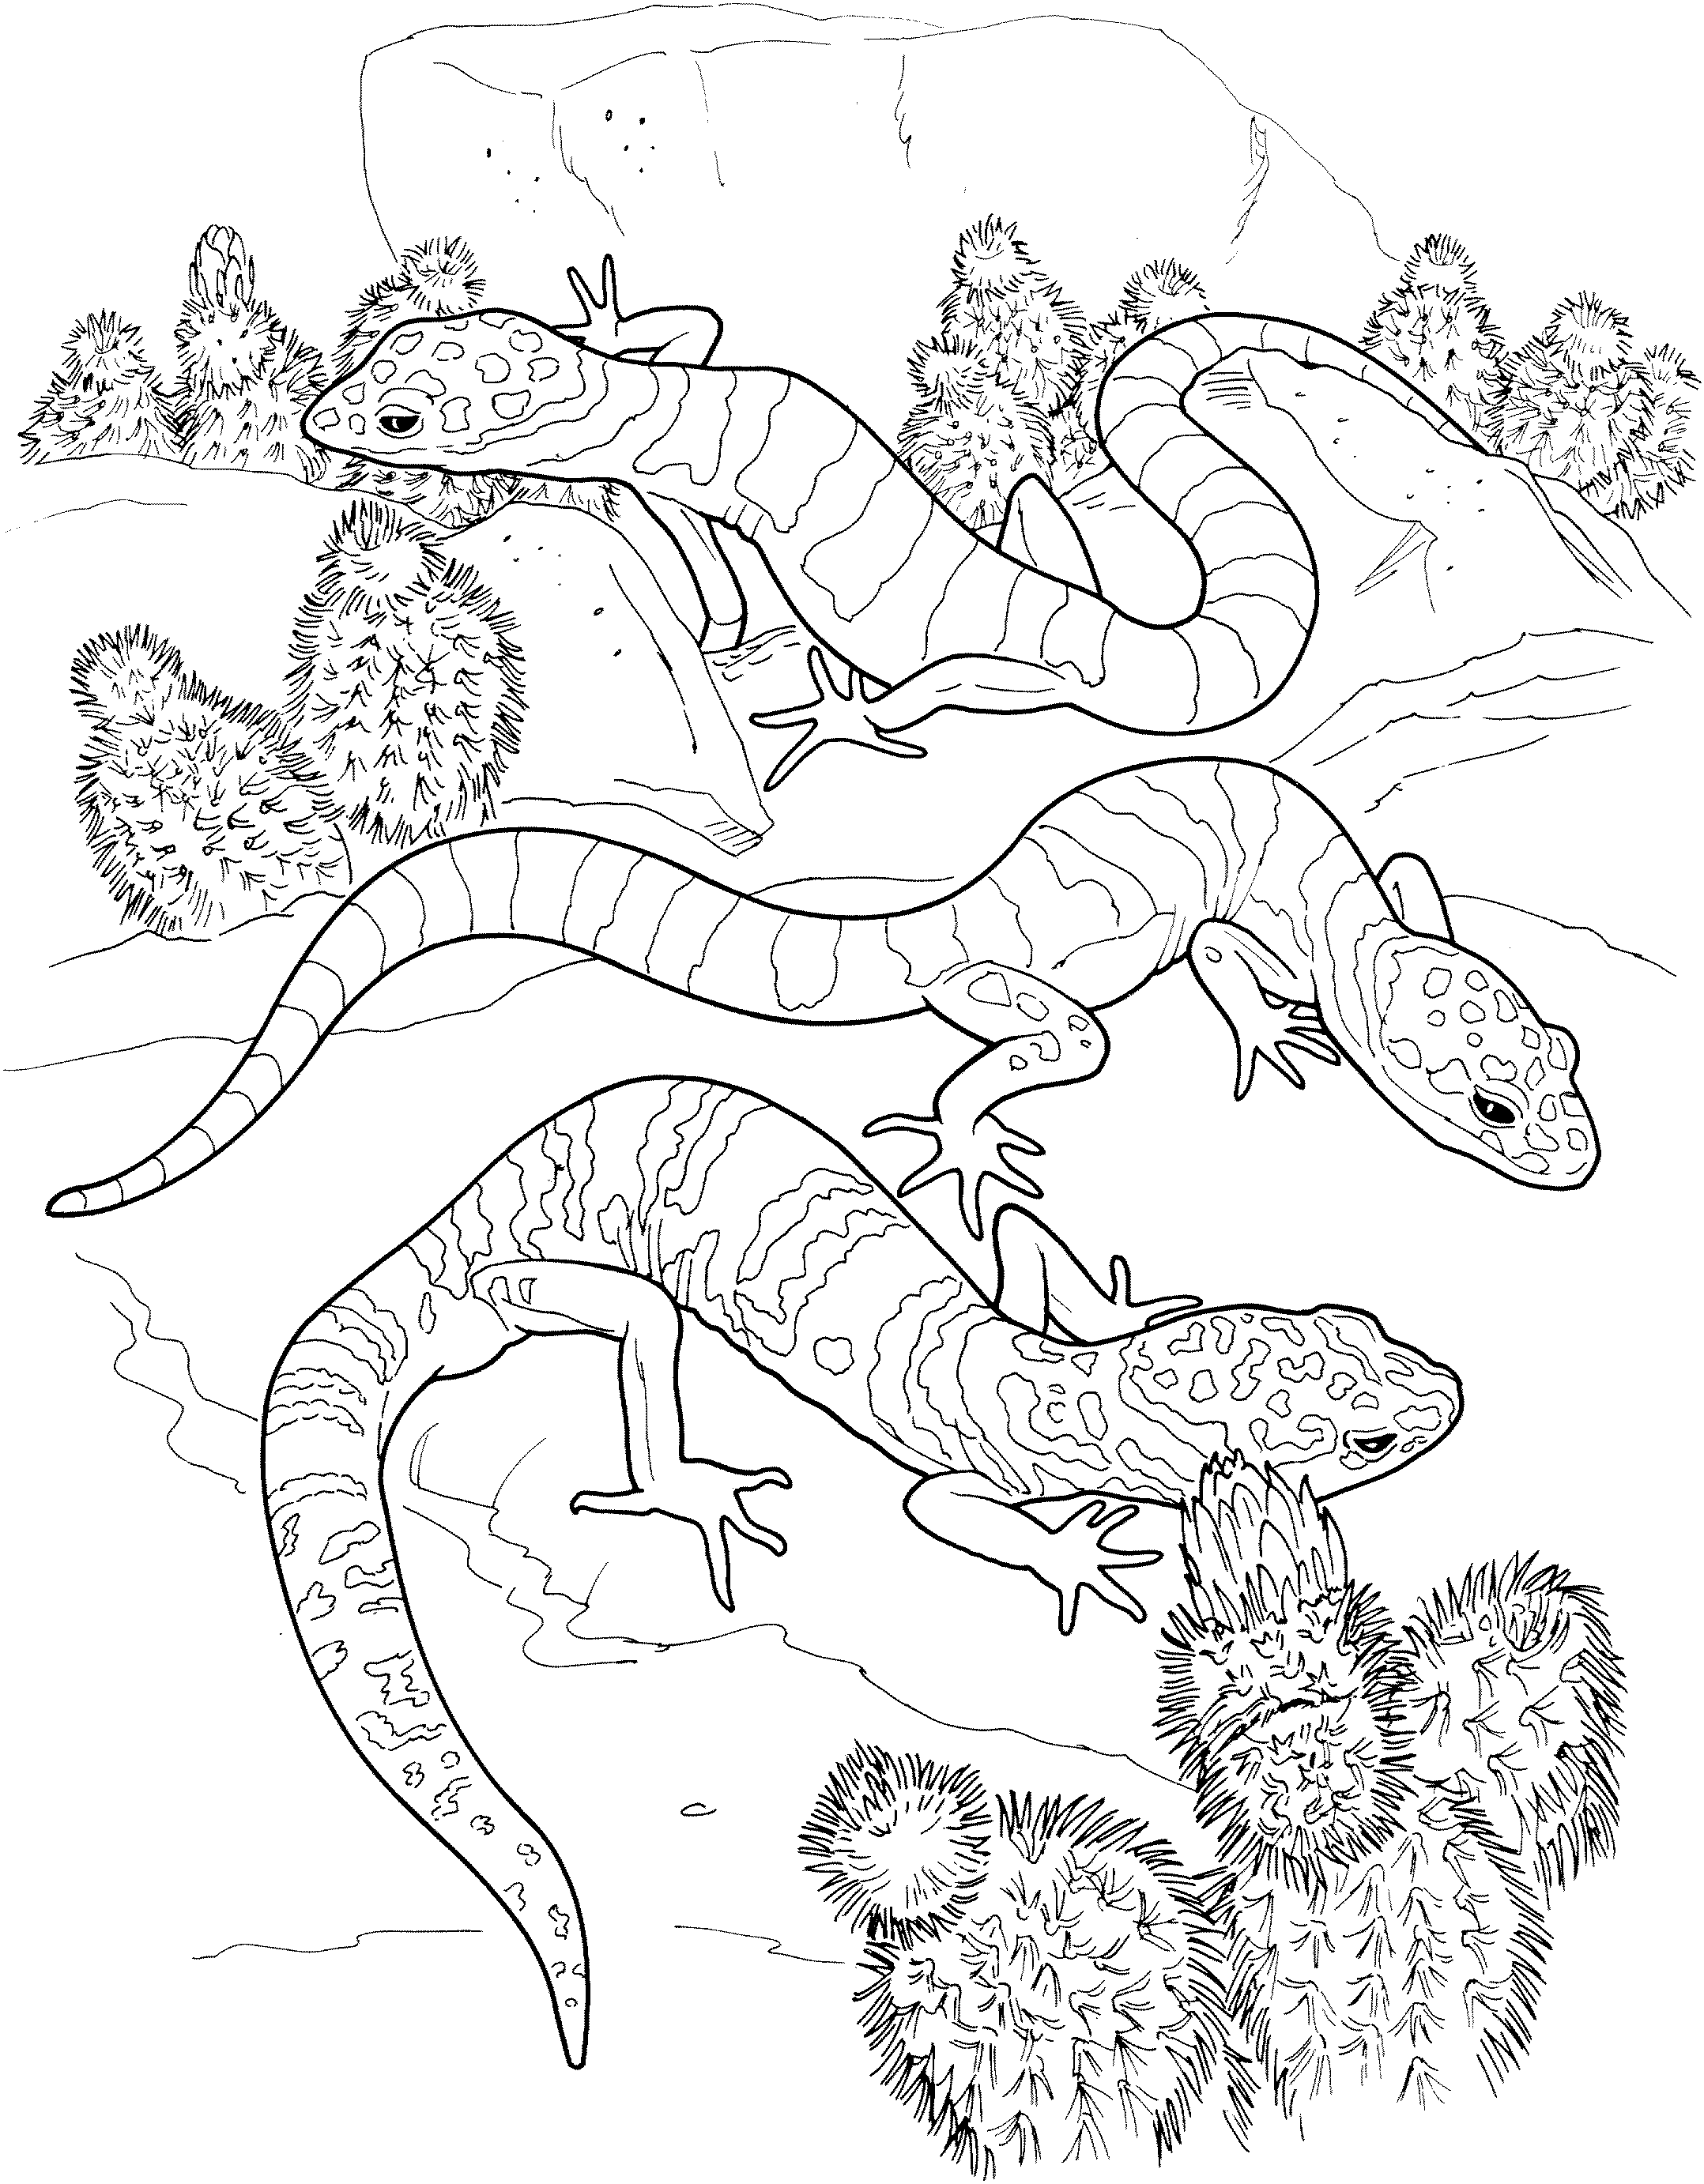 Lizard Coloring Pages 10